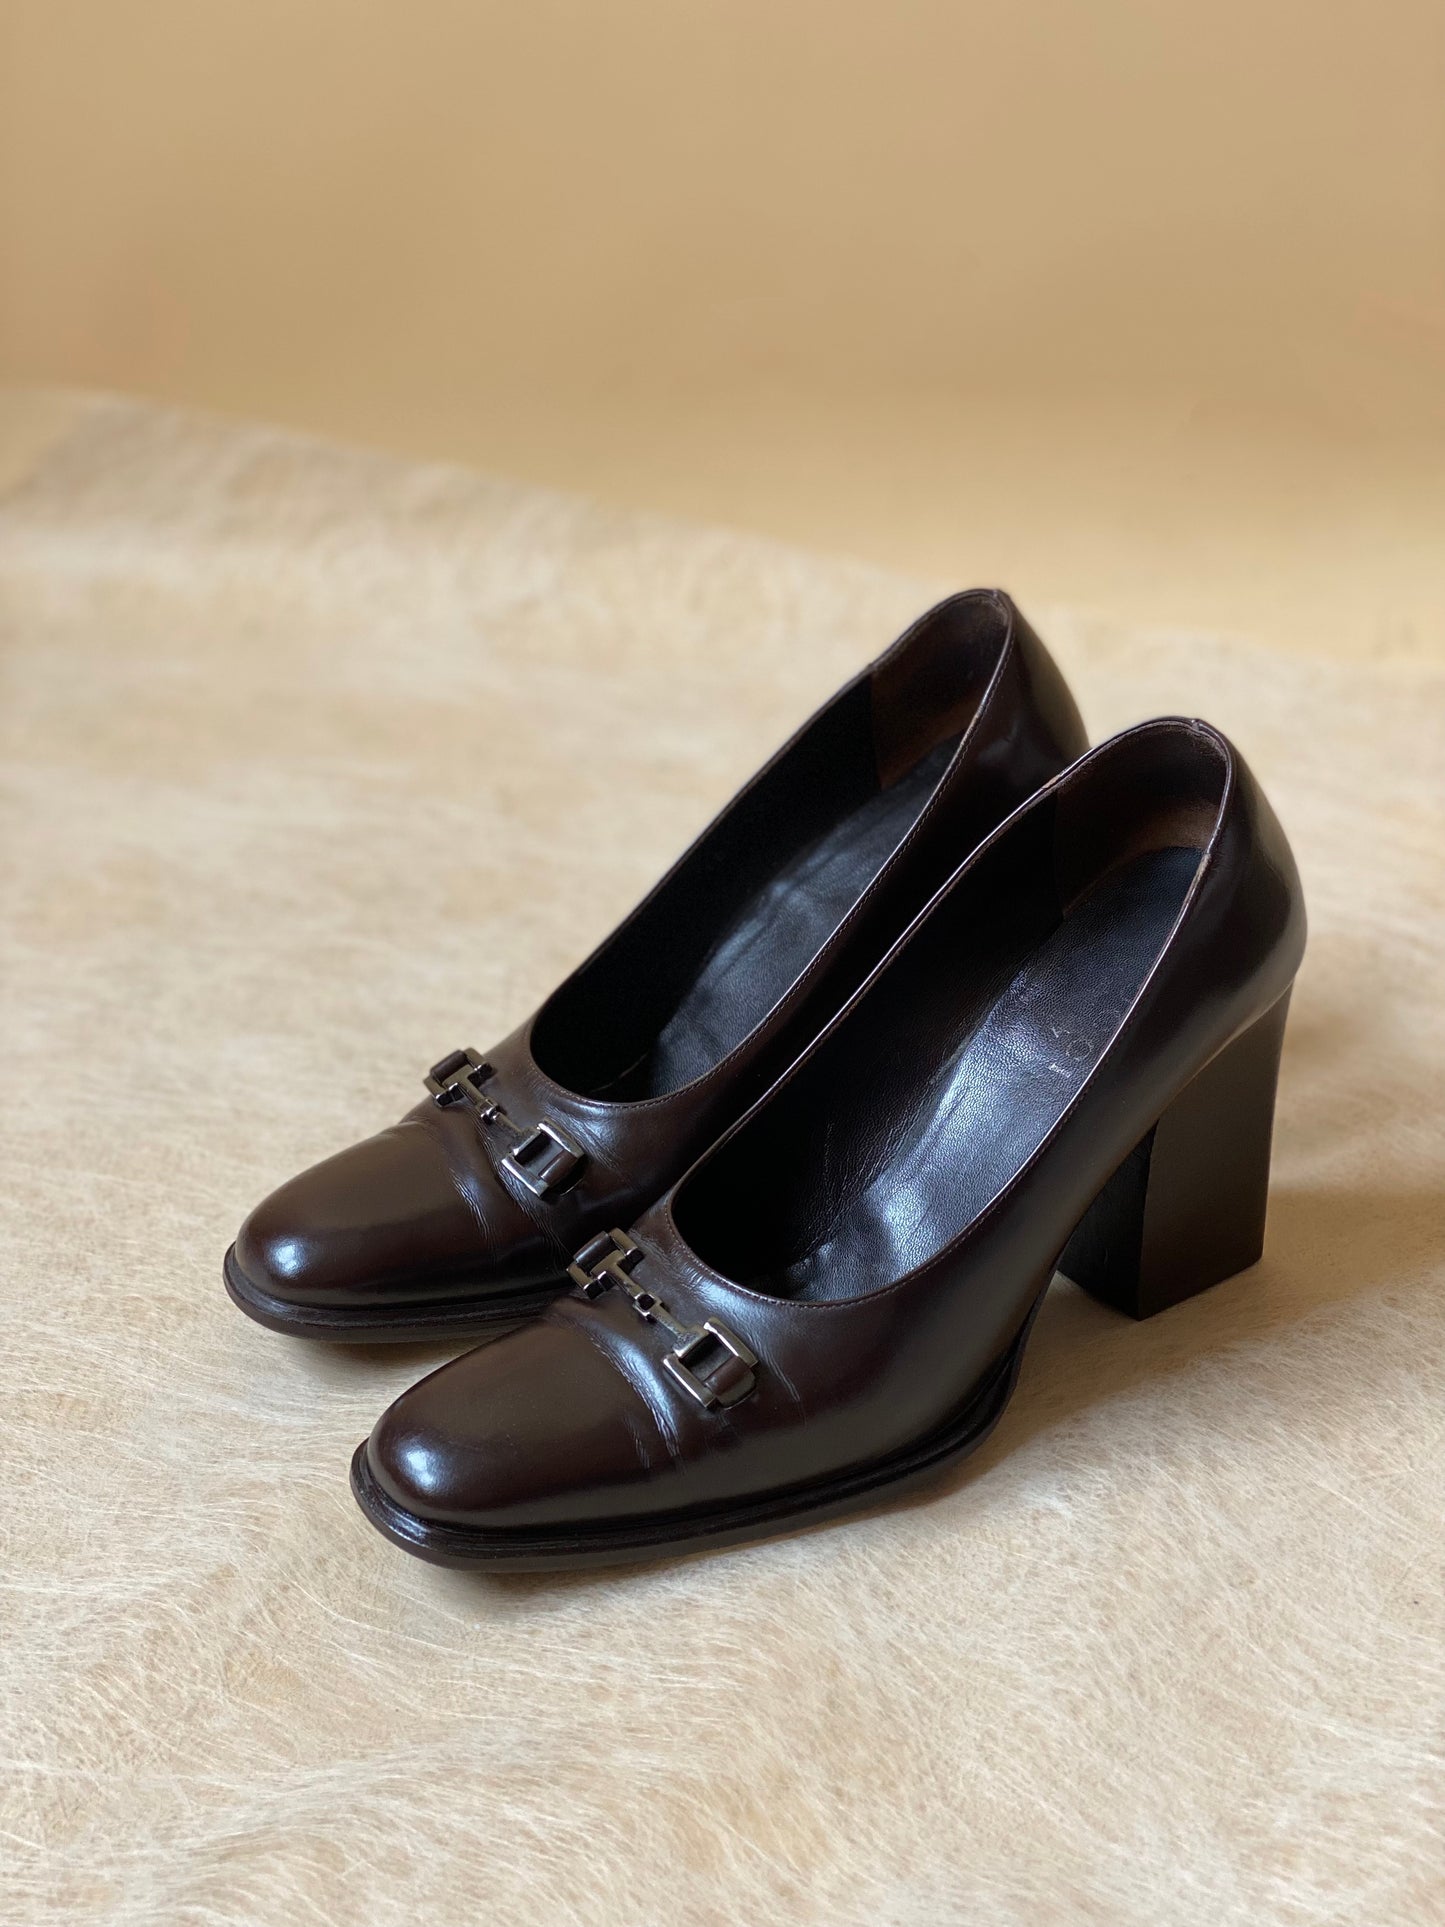 Gucci Chocolate Brown Pumps